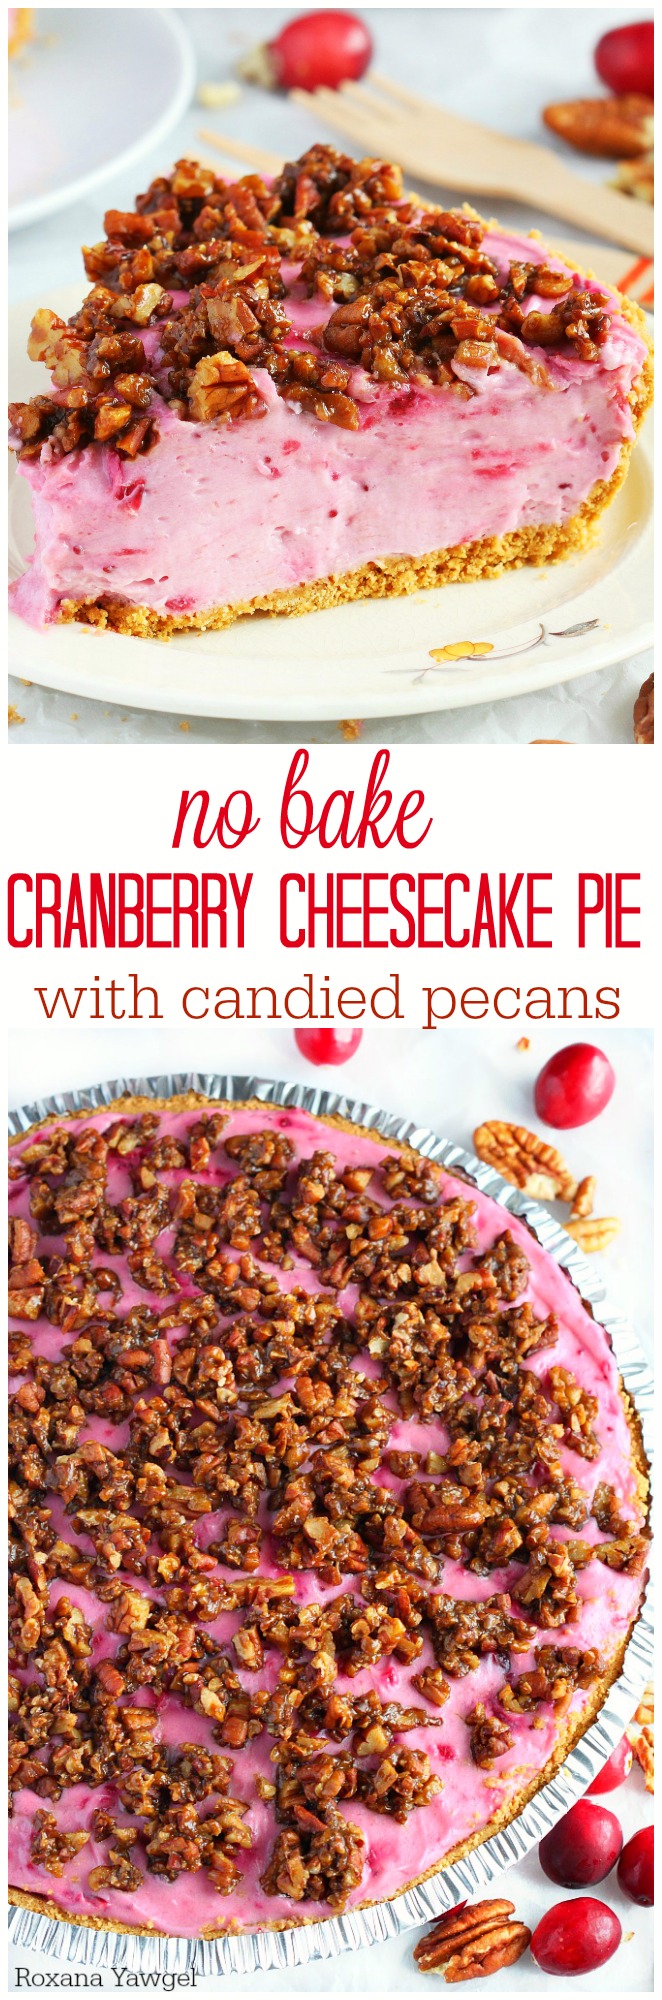 No need to fight for oven space! This irresistible cranberry cheesecake pie requires no baking and those candied pecans on top are to die for! A must for your holiday table!